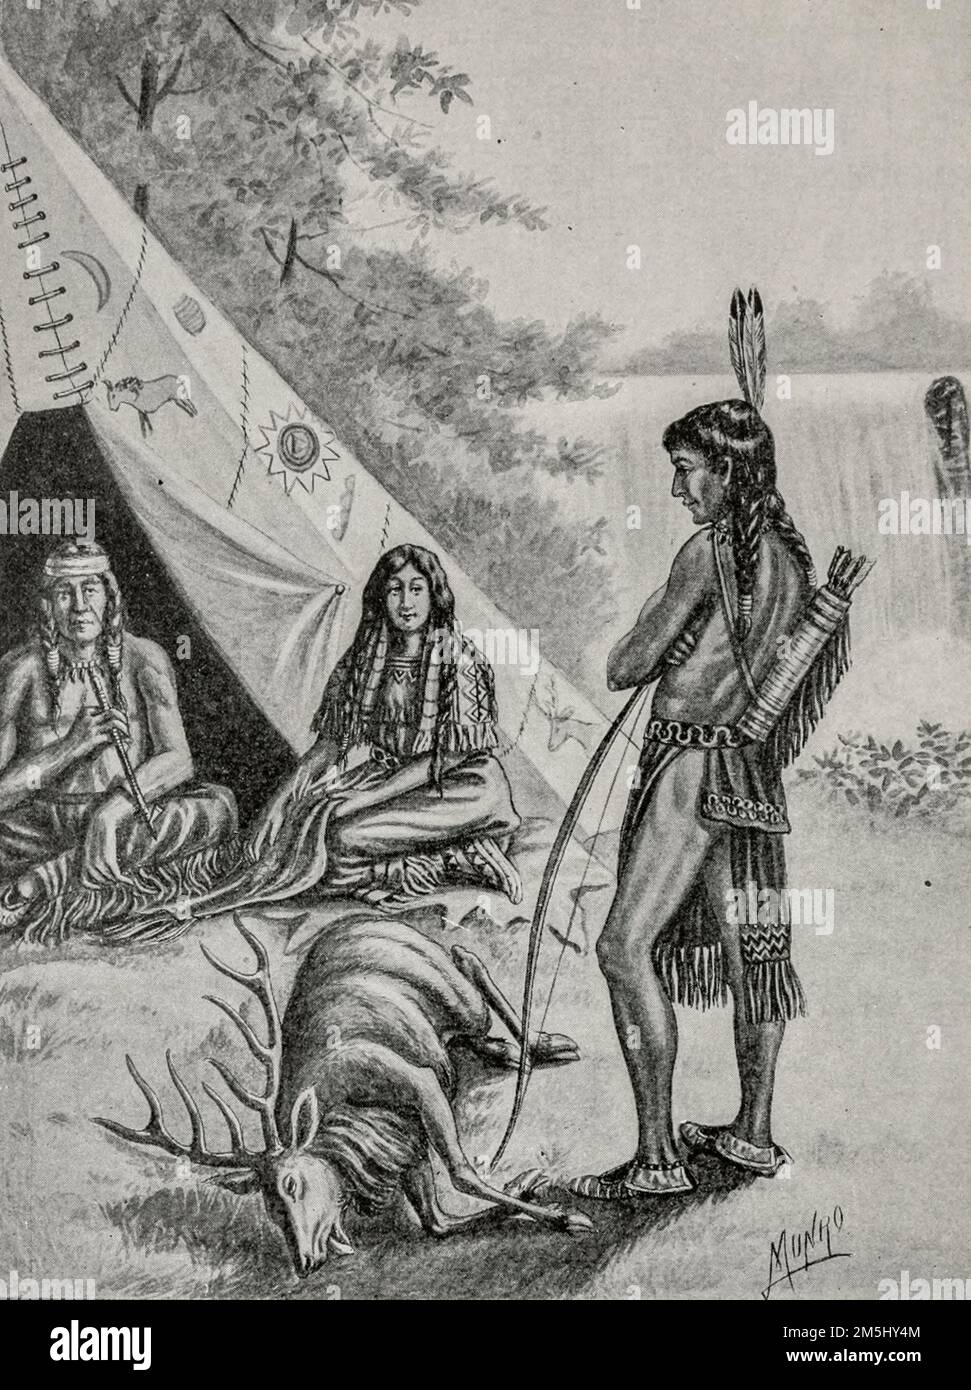 Hiawatha at the home of Minnehaha with a gift of a hunted dear illustrated by Ella Booher, From the book Hiawatha the Indian from Longfellow's Song of Hiawatha by Henry Wadsworth Longfellow, 1807-1882; Stock Photo